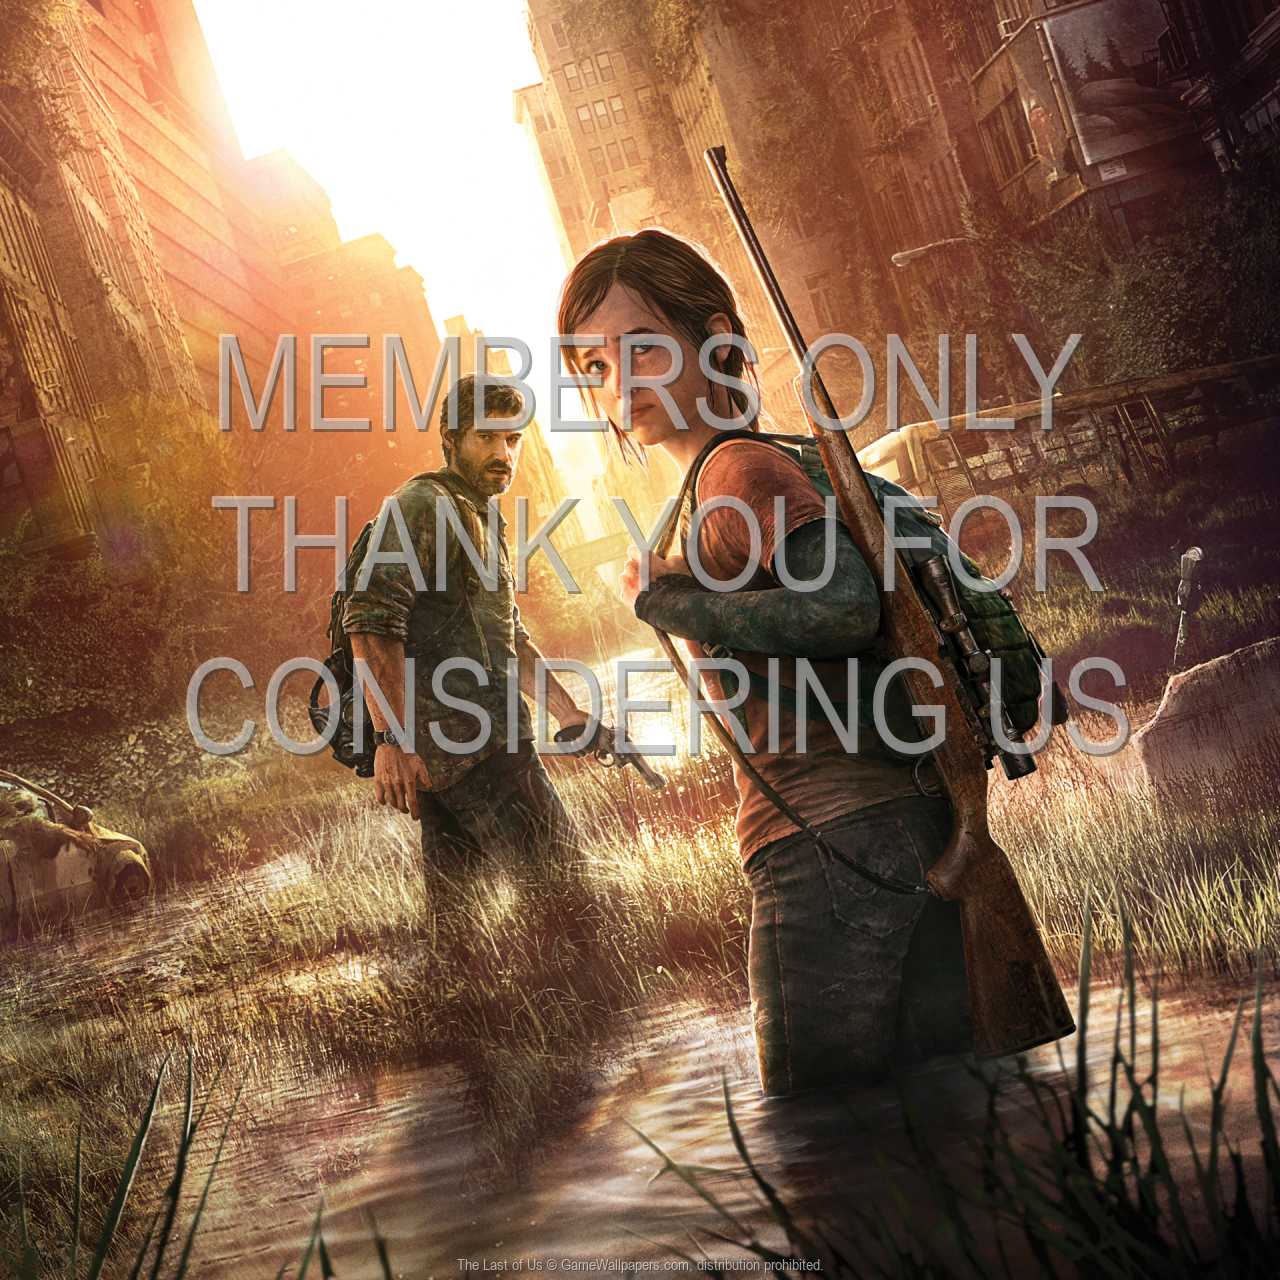 The Last of Us 720p Horizontal Mobile wallpaper or background 17